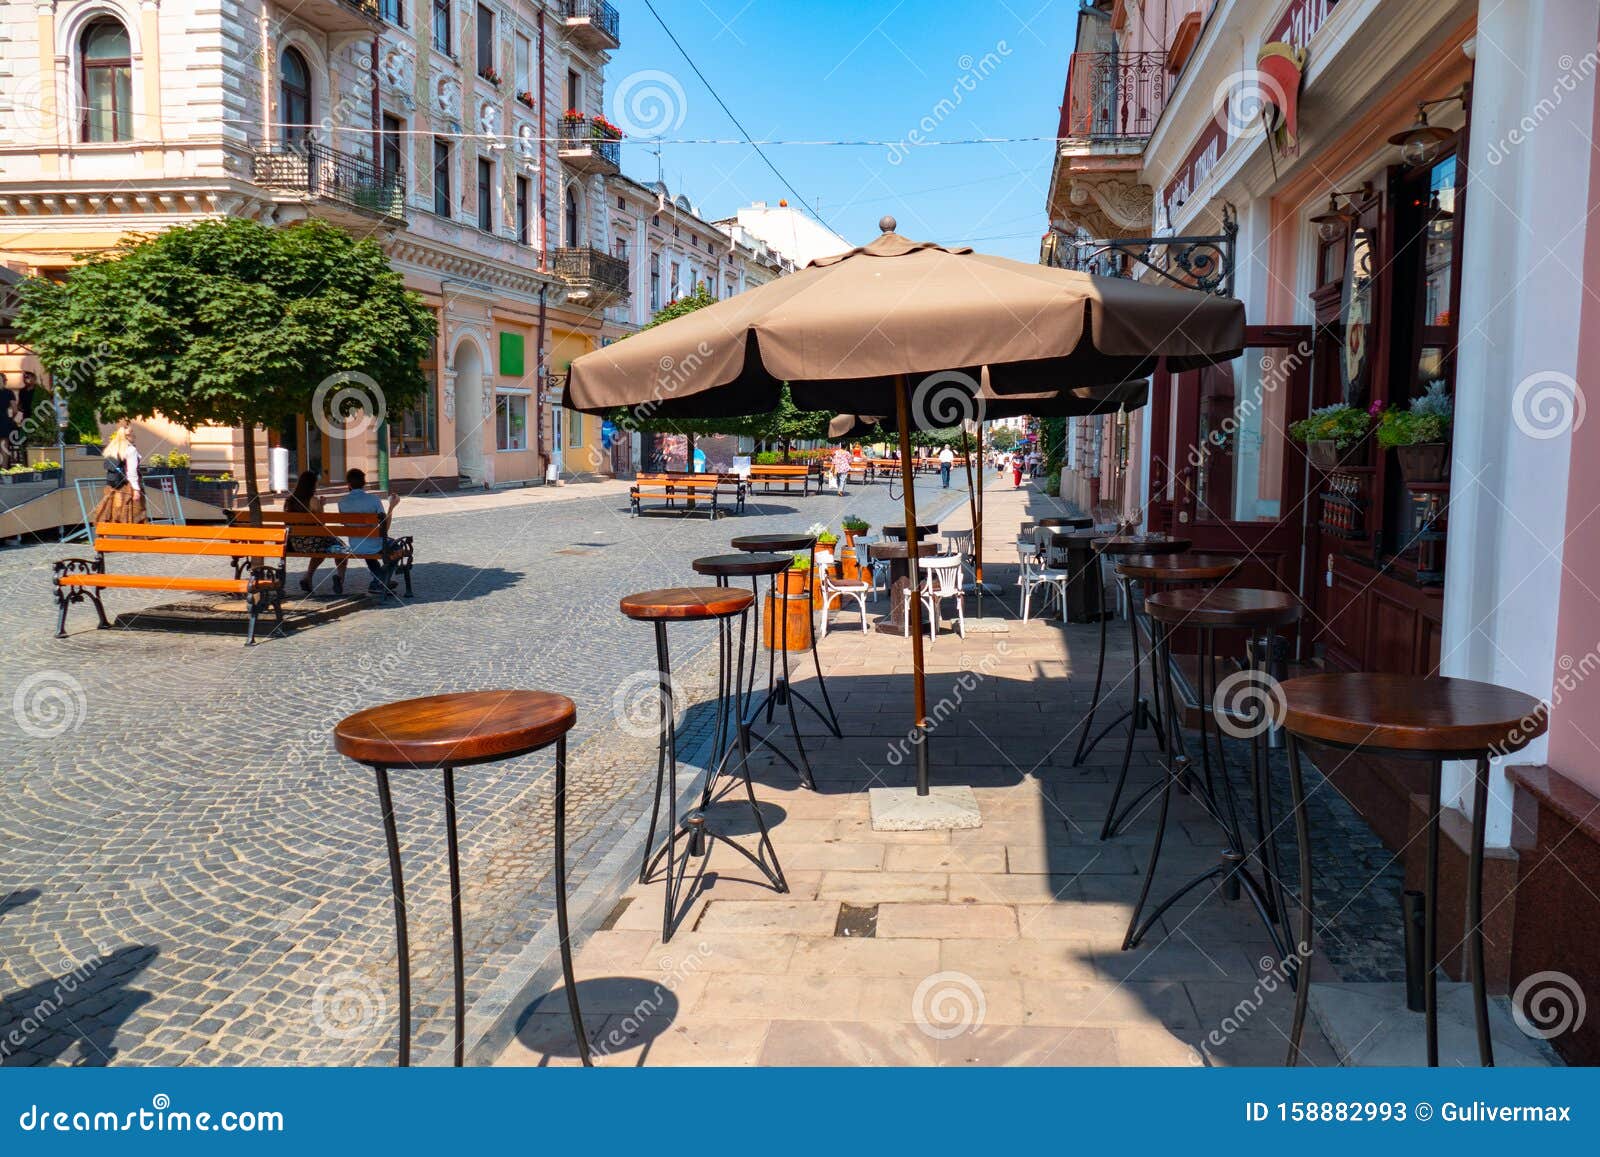  Outdoor  Cafe  In Sunlight Close  Up  Stock Image Image of 